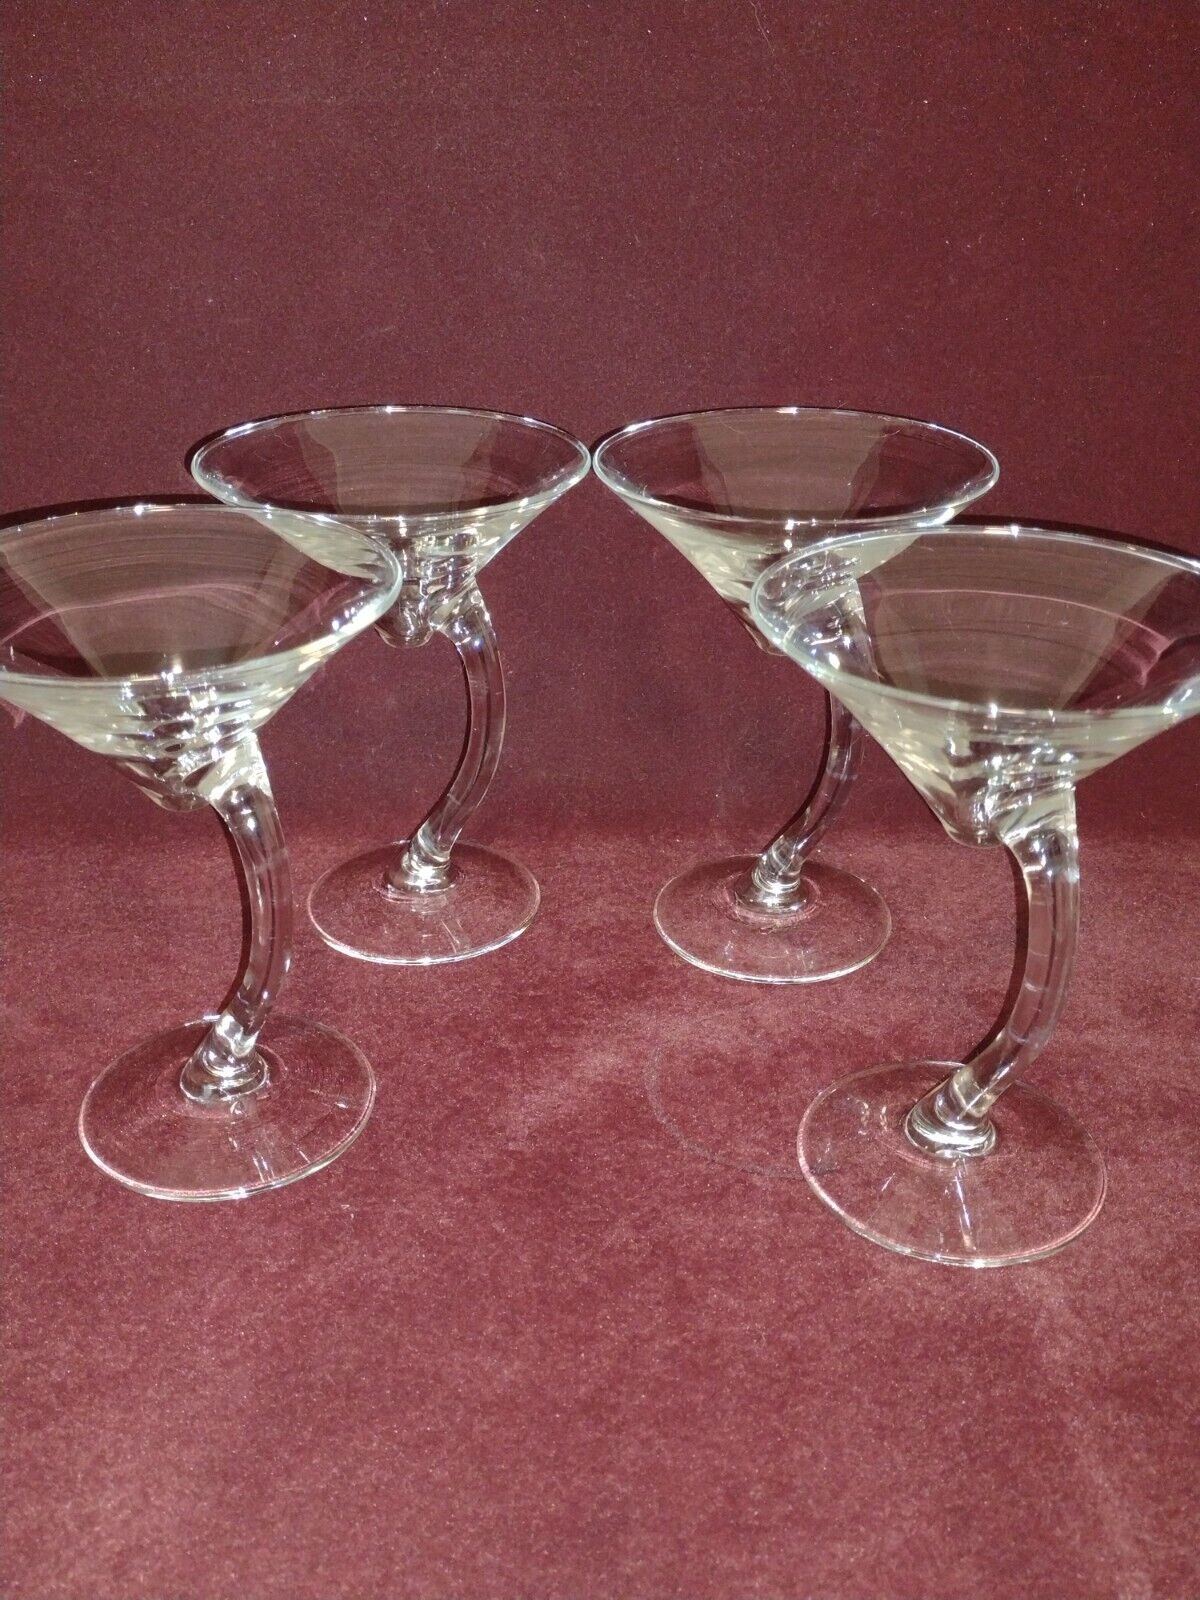 Vintage Libbey (?) Clear Martini Glasses with Curved Stem - Unique Set of 4 NICE